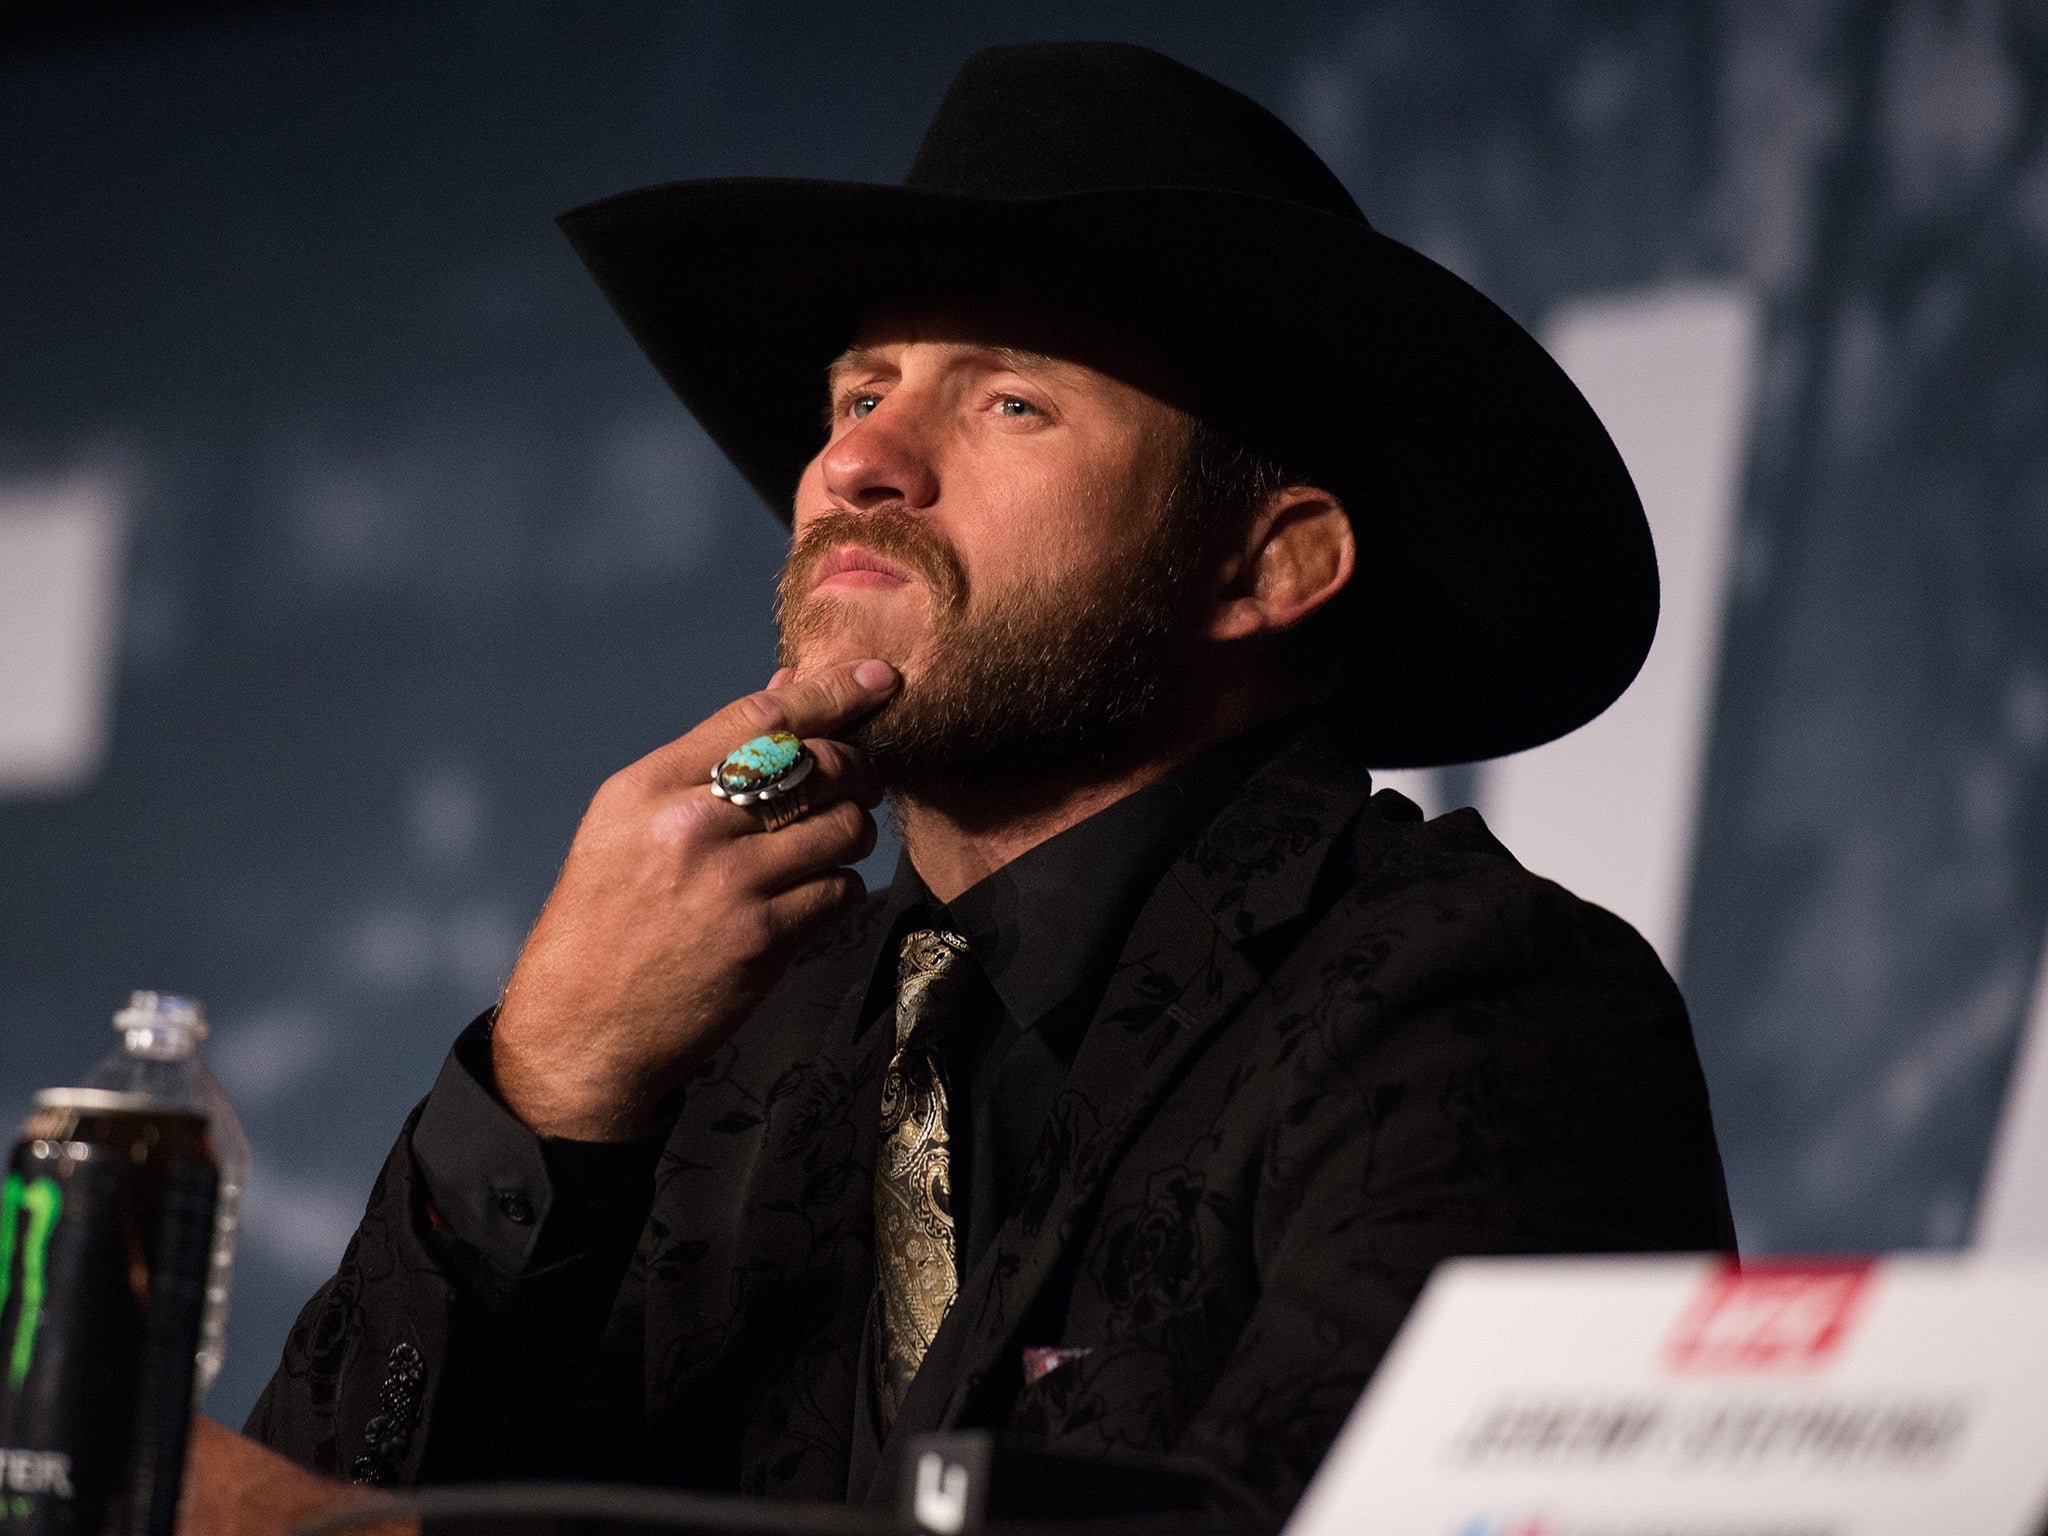 Donald Cerrone says there aren't many UFC fighters who like Conor McGregor